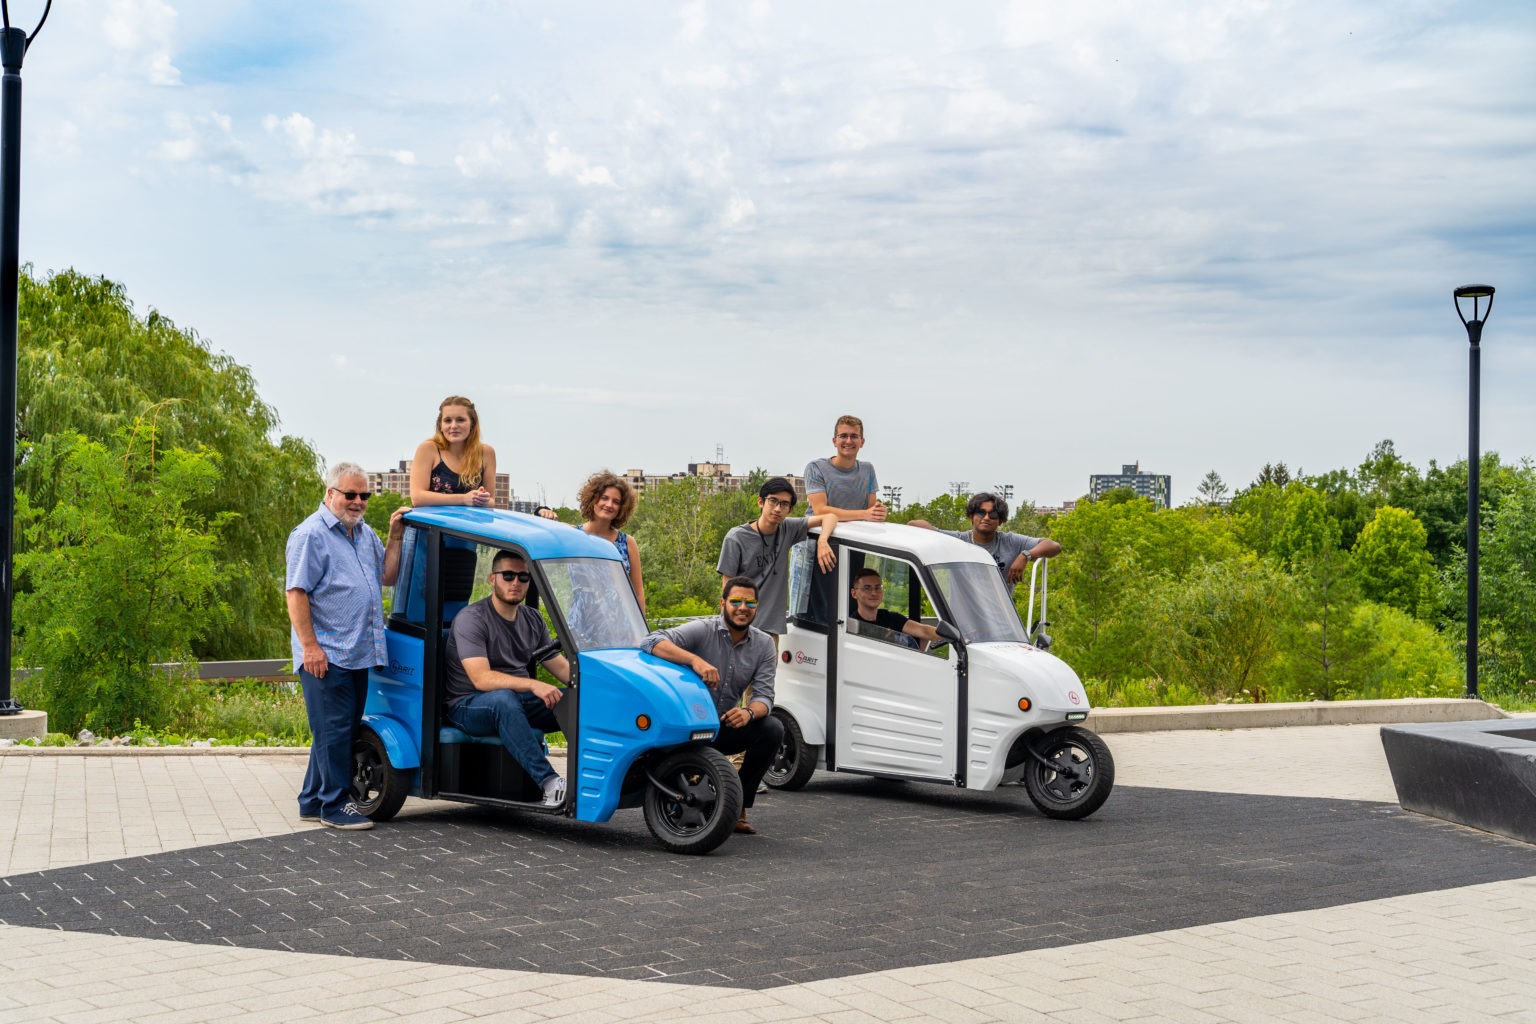 York University Becomes “Living Lab” for Next Generation of Electric Vehicles